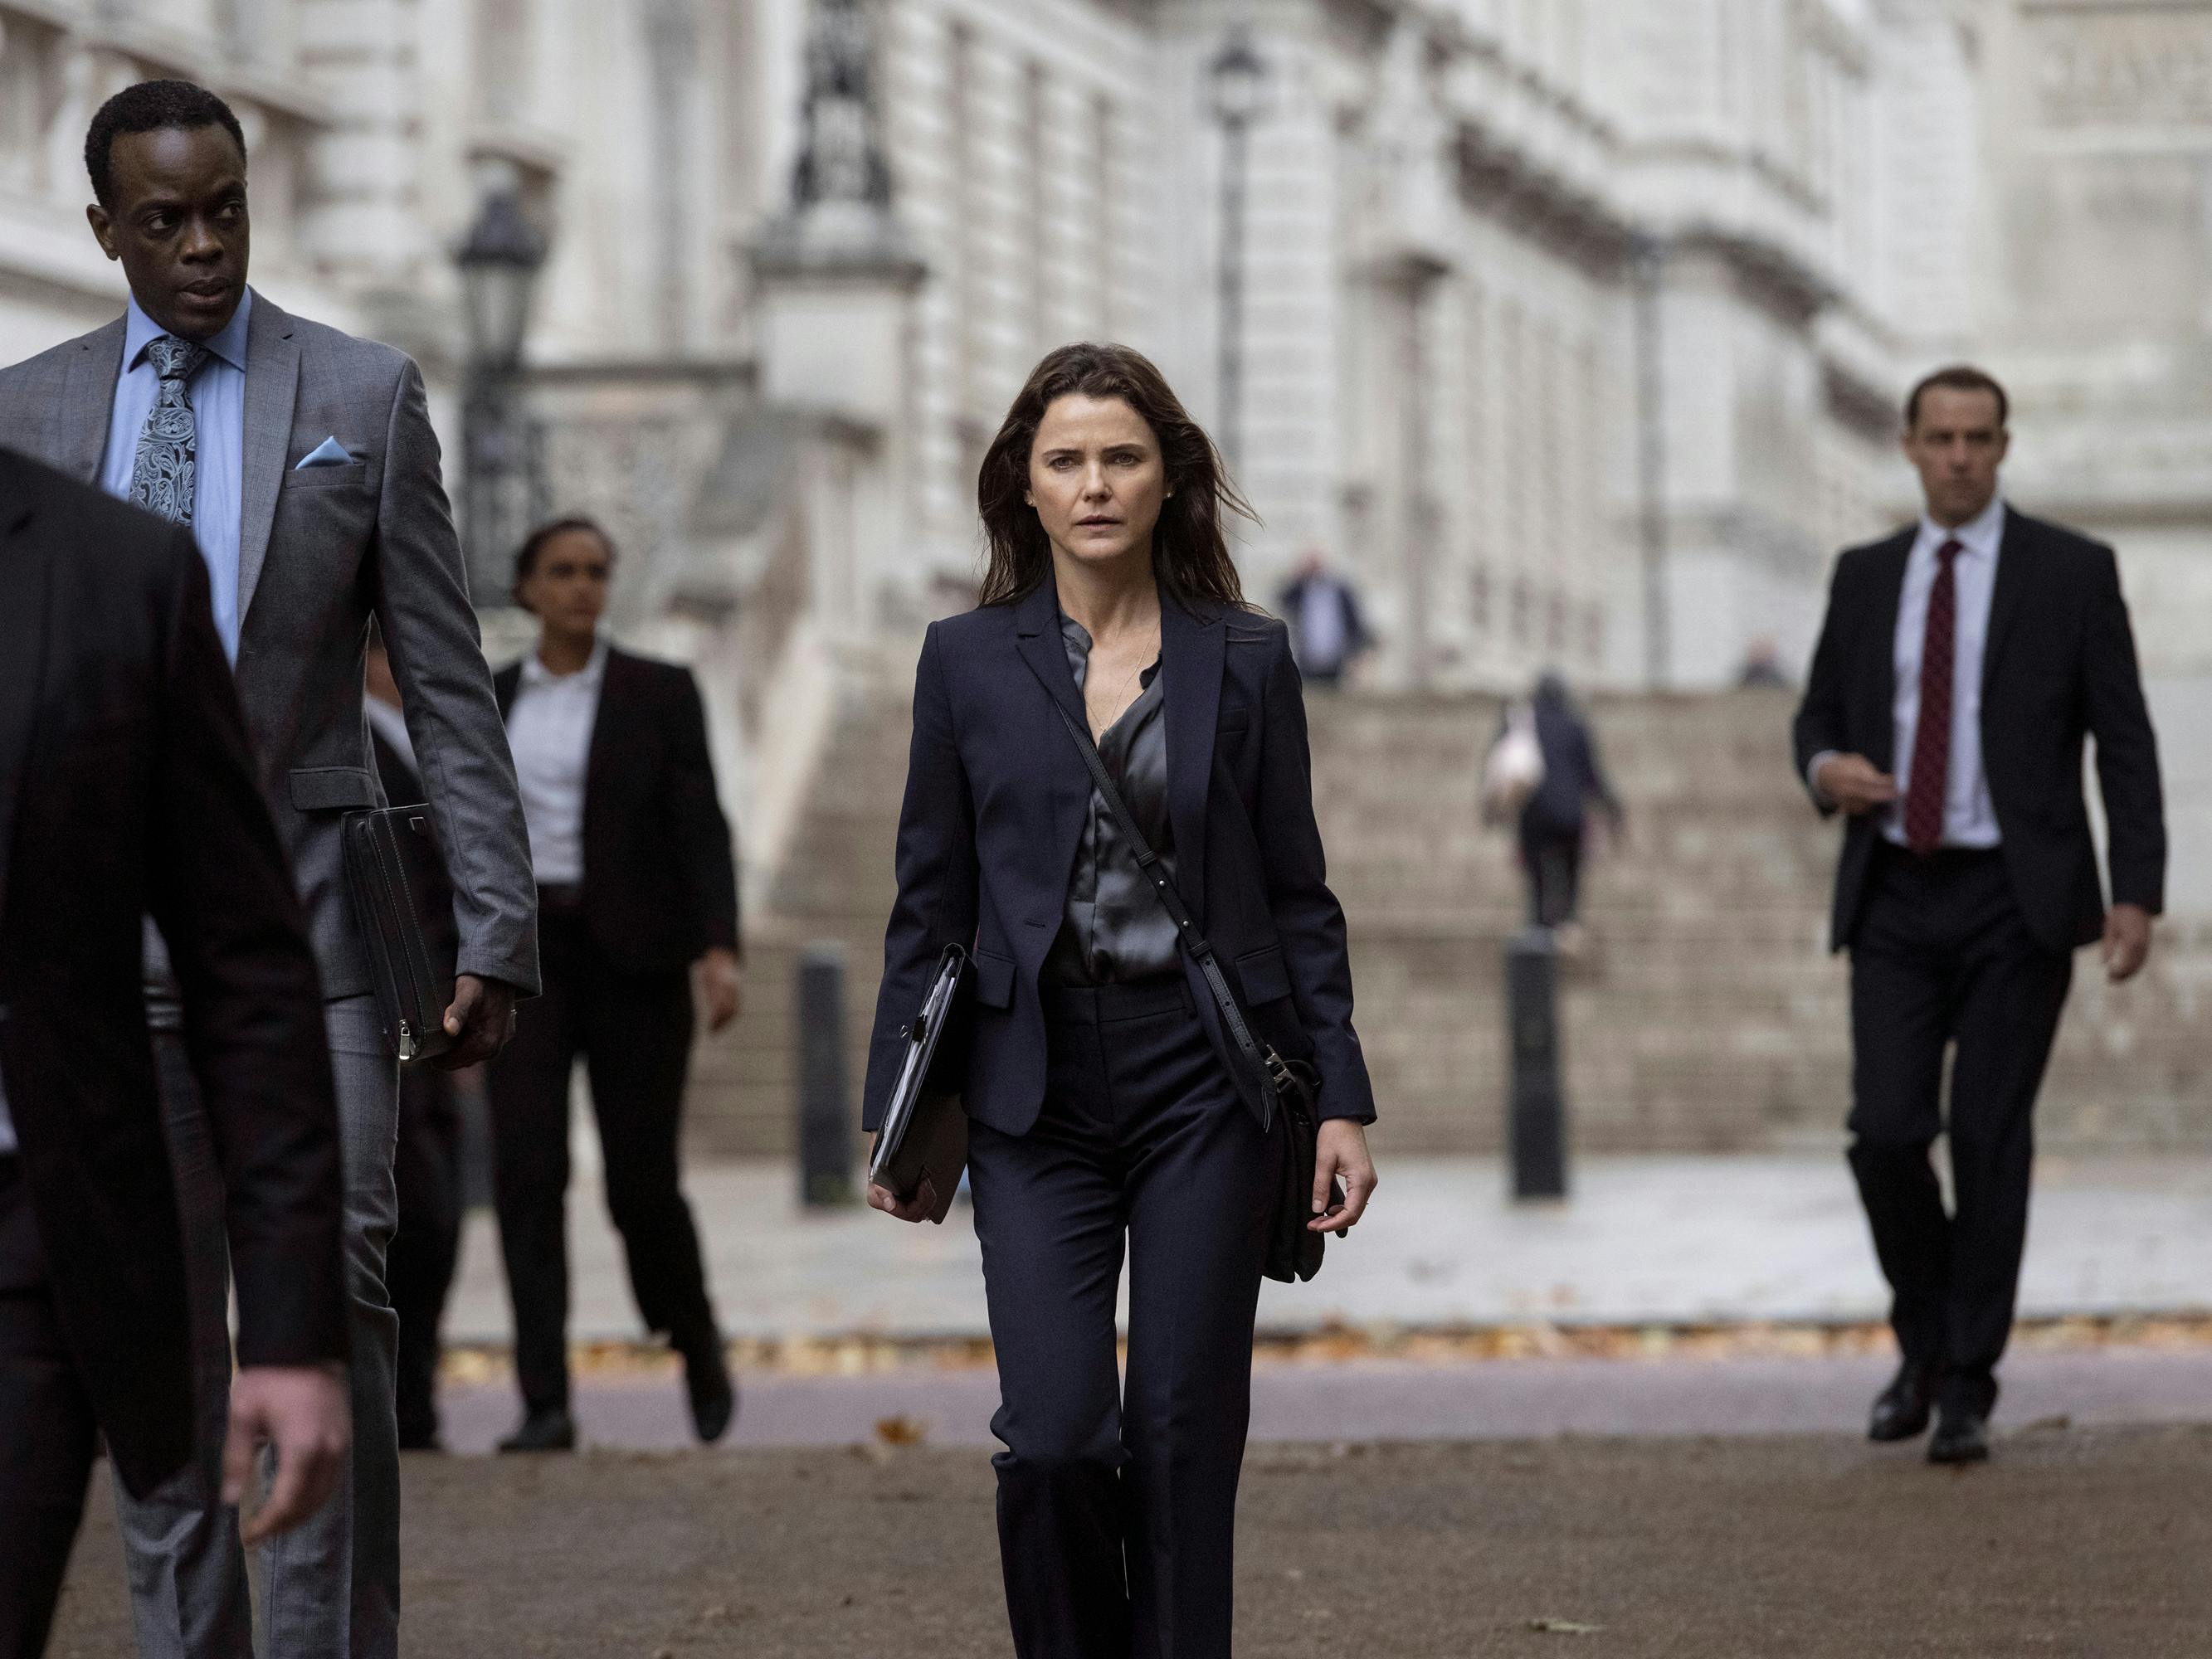 Stuart Heyford (Ato Essandoh) and Kate Wyler (Keri Russell) walk on a city street looking intense, surrounded by other intense-looking people in suits.